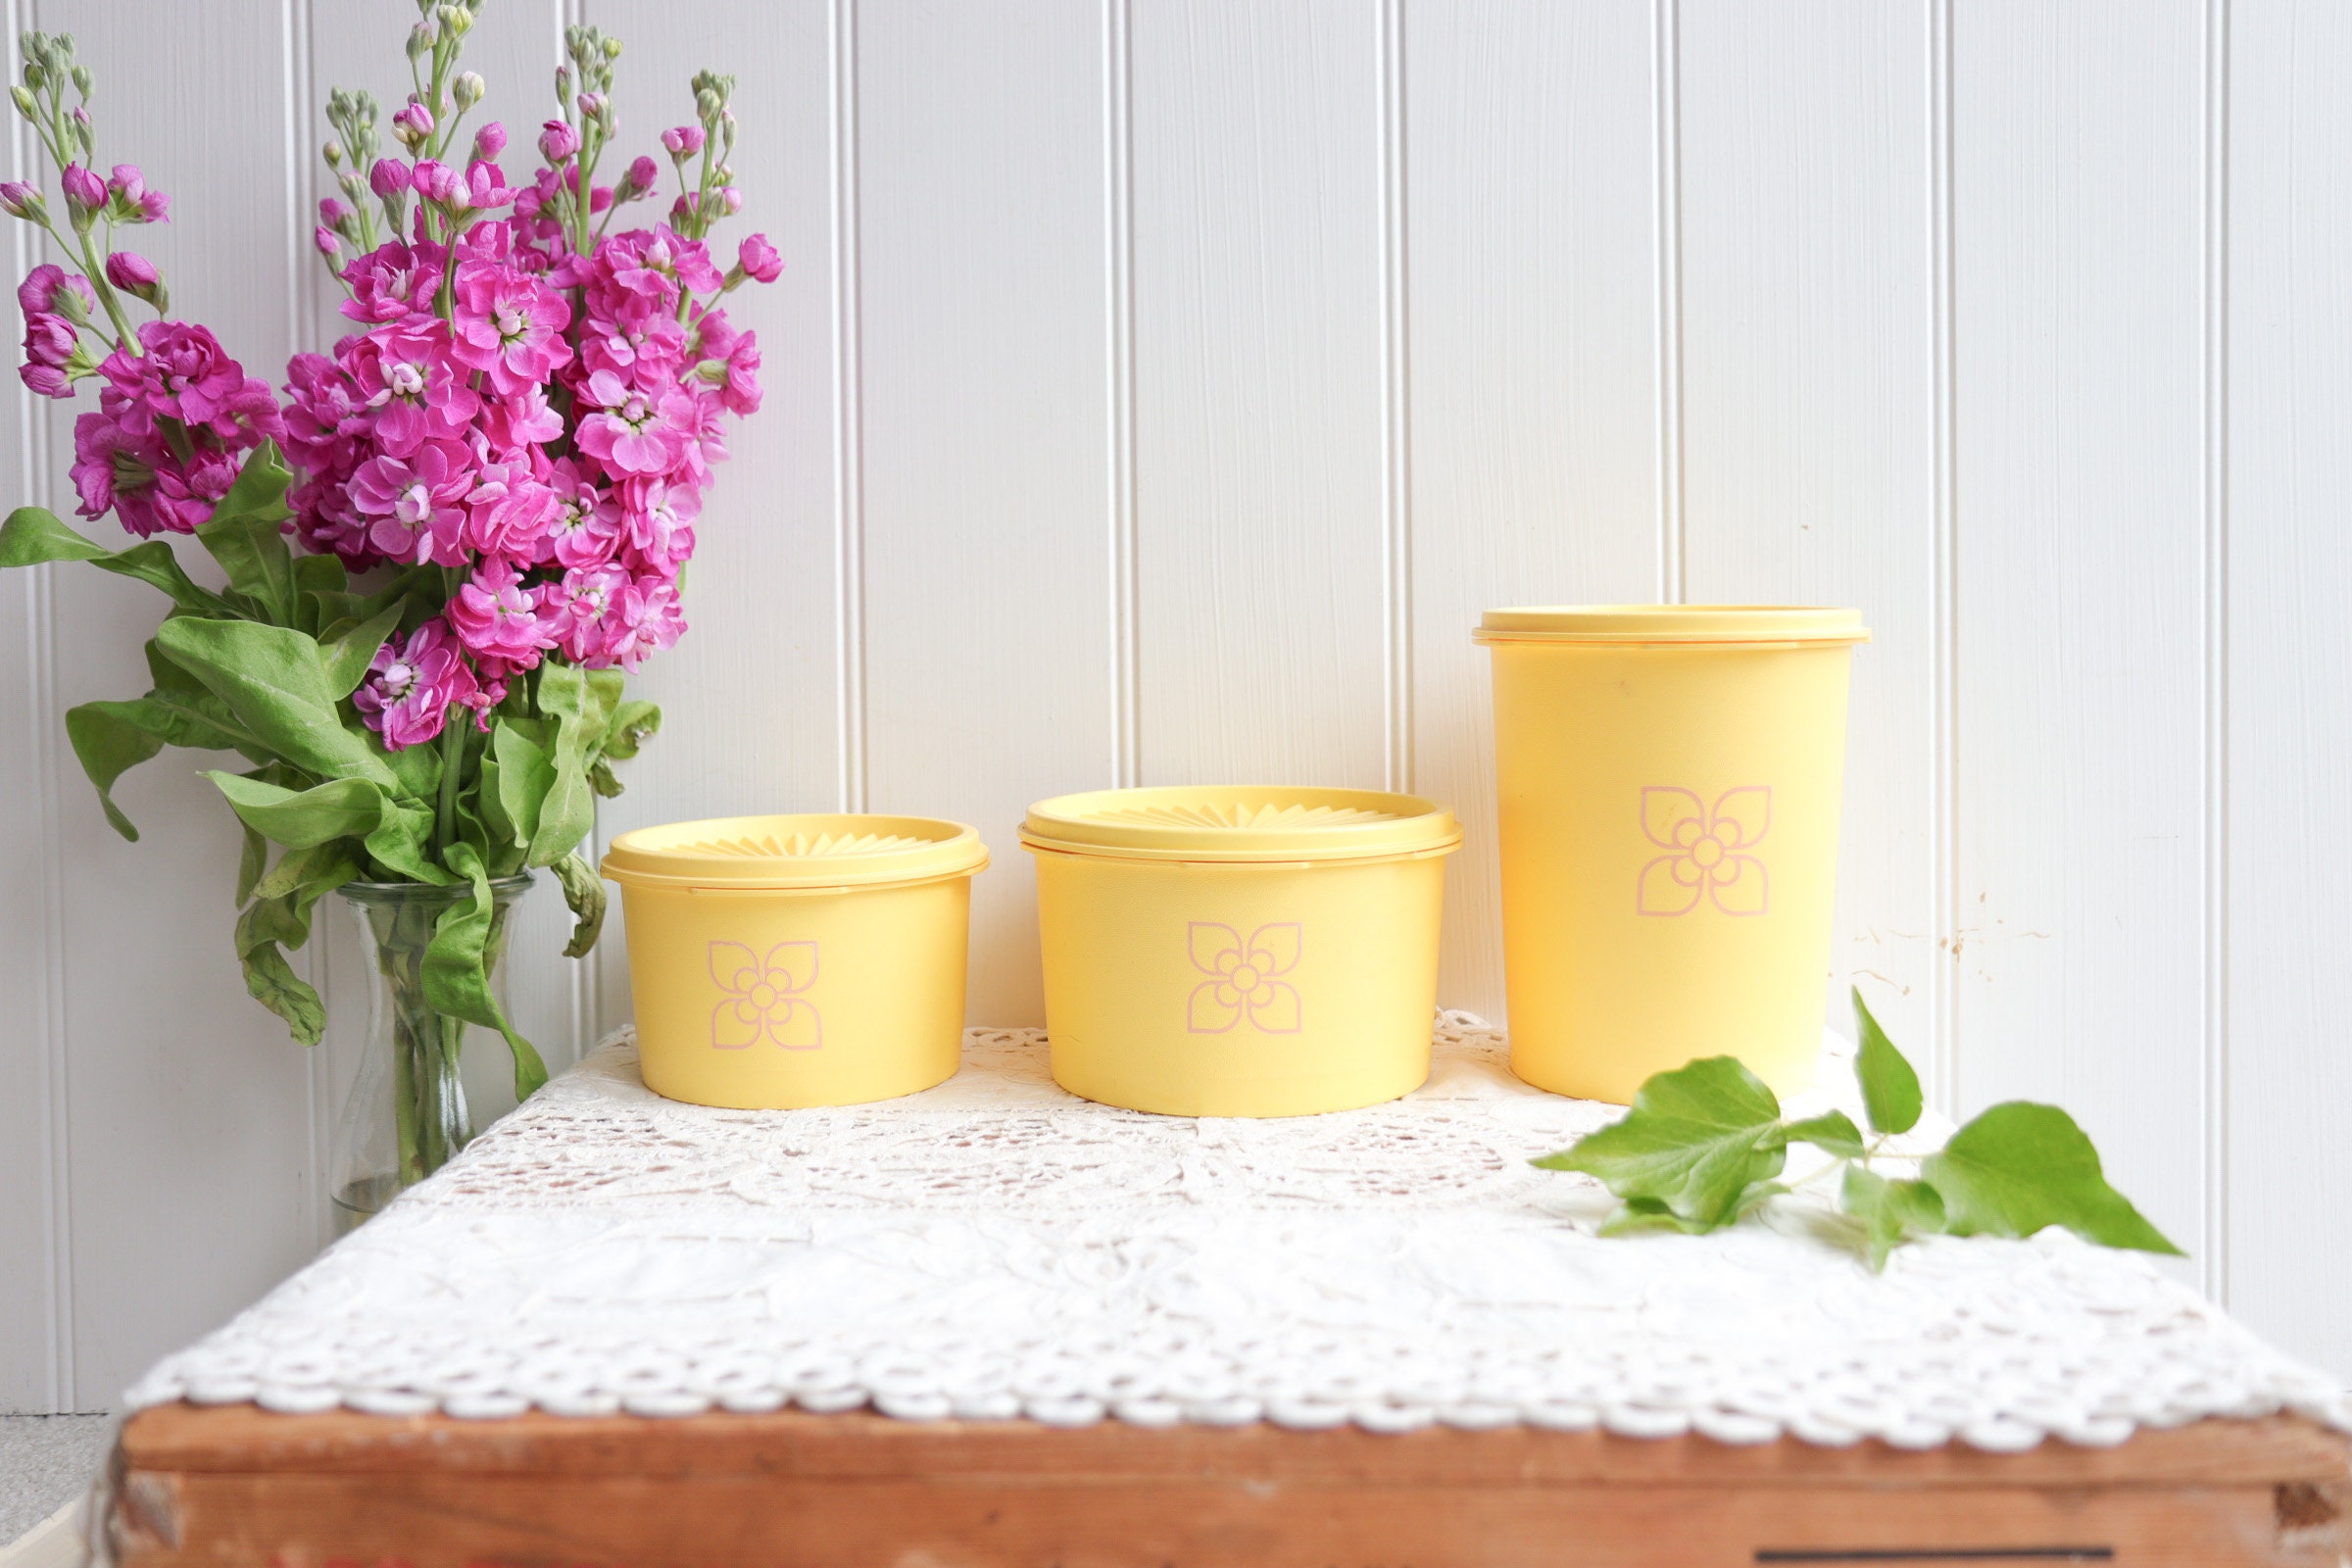 vintage yellow tupperware canisters. Set of 3. 3 sizes